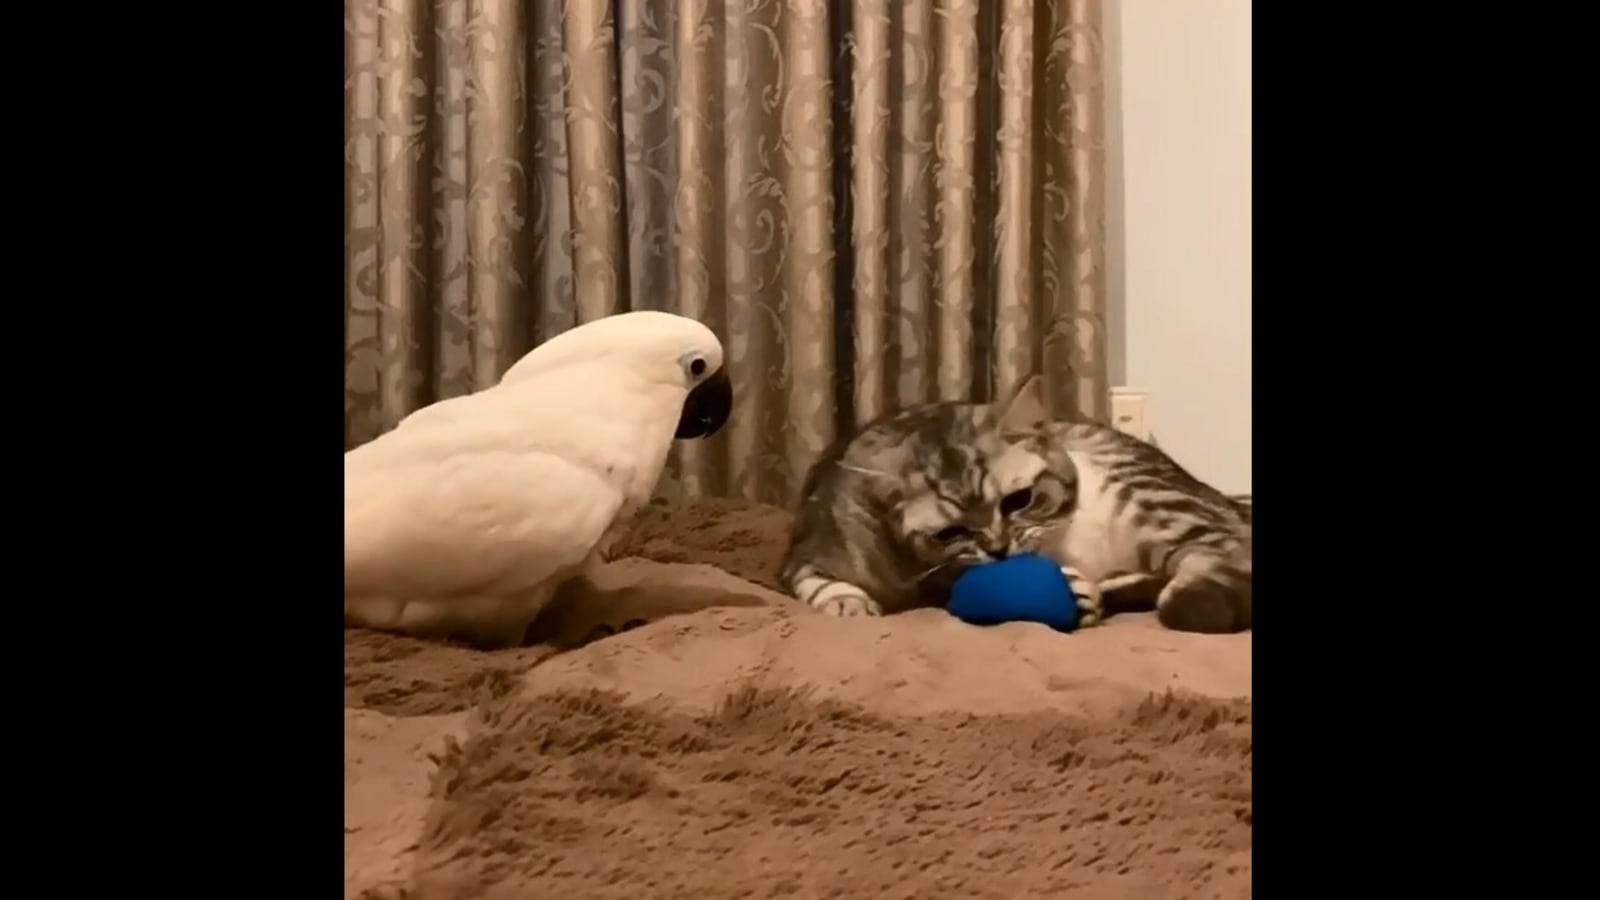 Cockatoo snatches away toy from cat, starts playing with it. Watch hilarious video | Trending